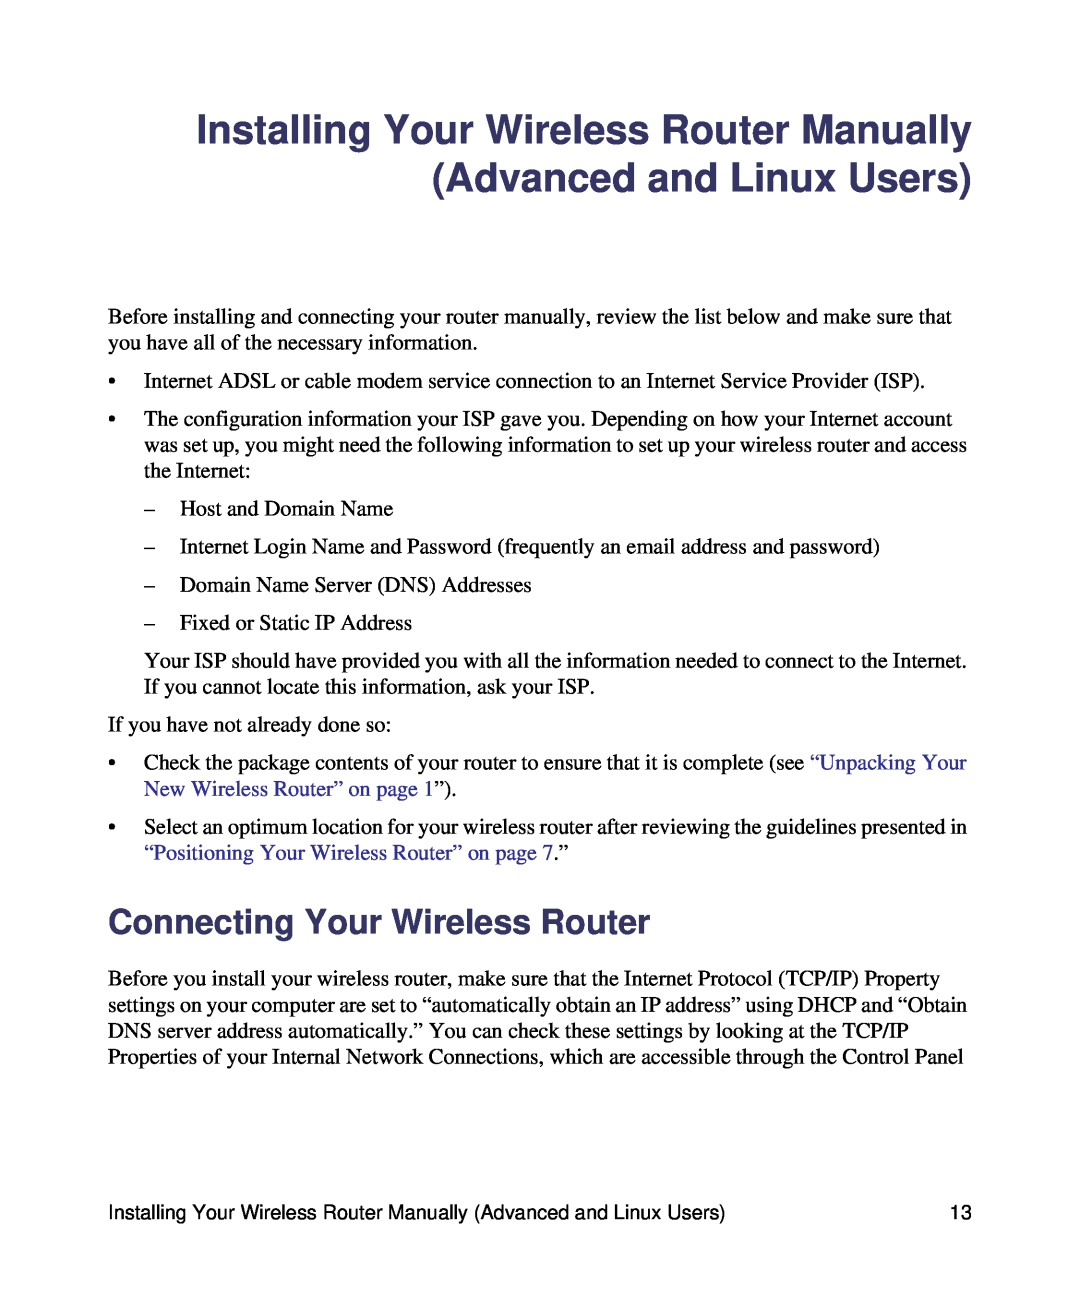 NETGEAR WNDR3400-100NAS Installing Your Wireless Router Manually Advanced and Linux Users, Connecting Your Wireless Router 